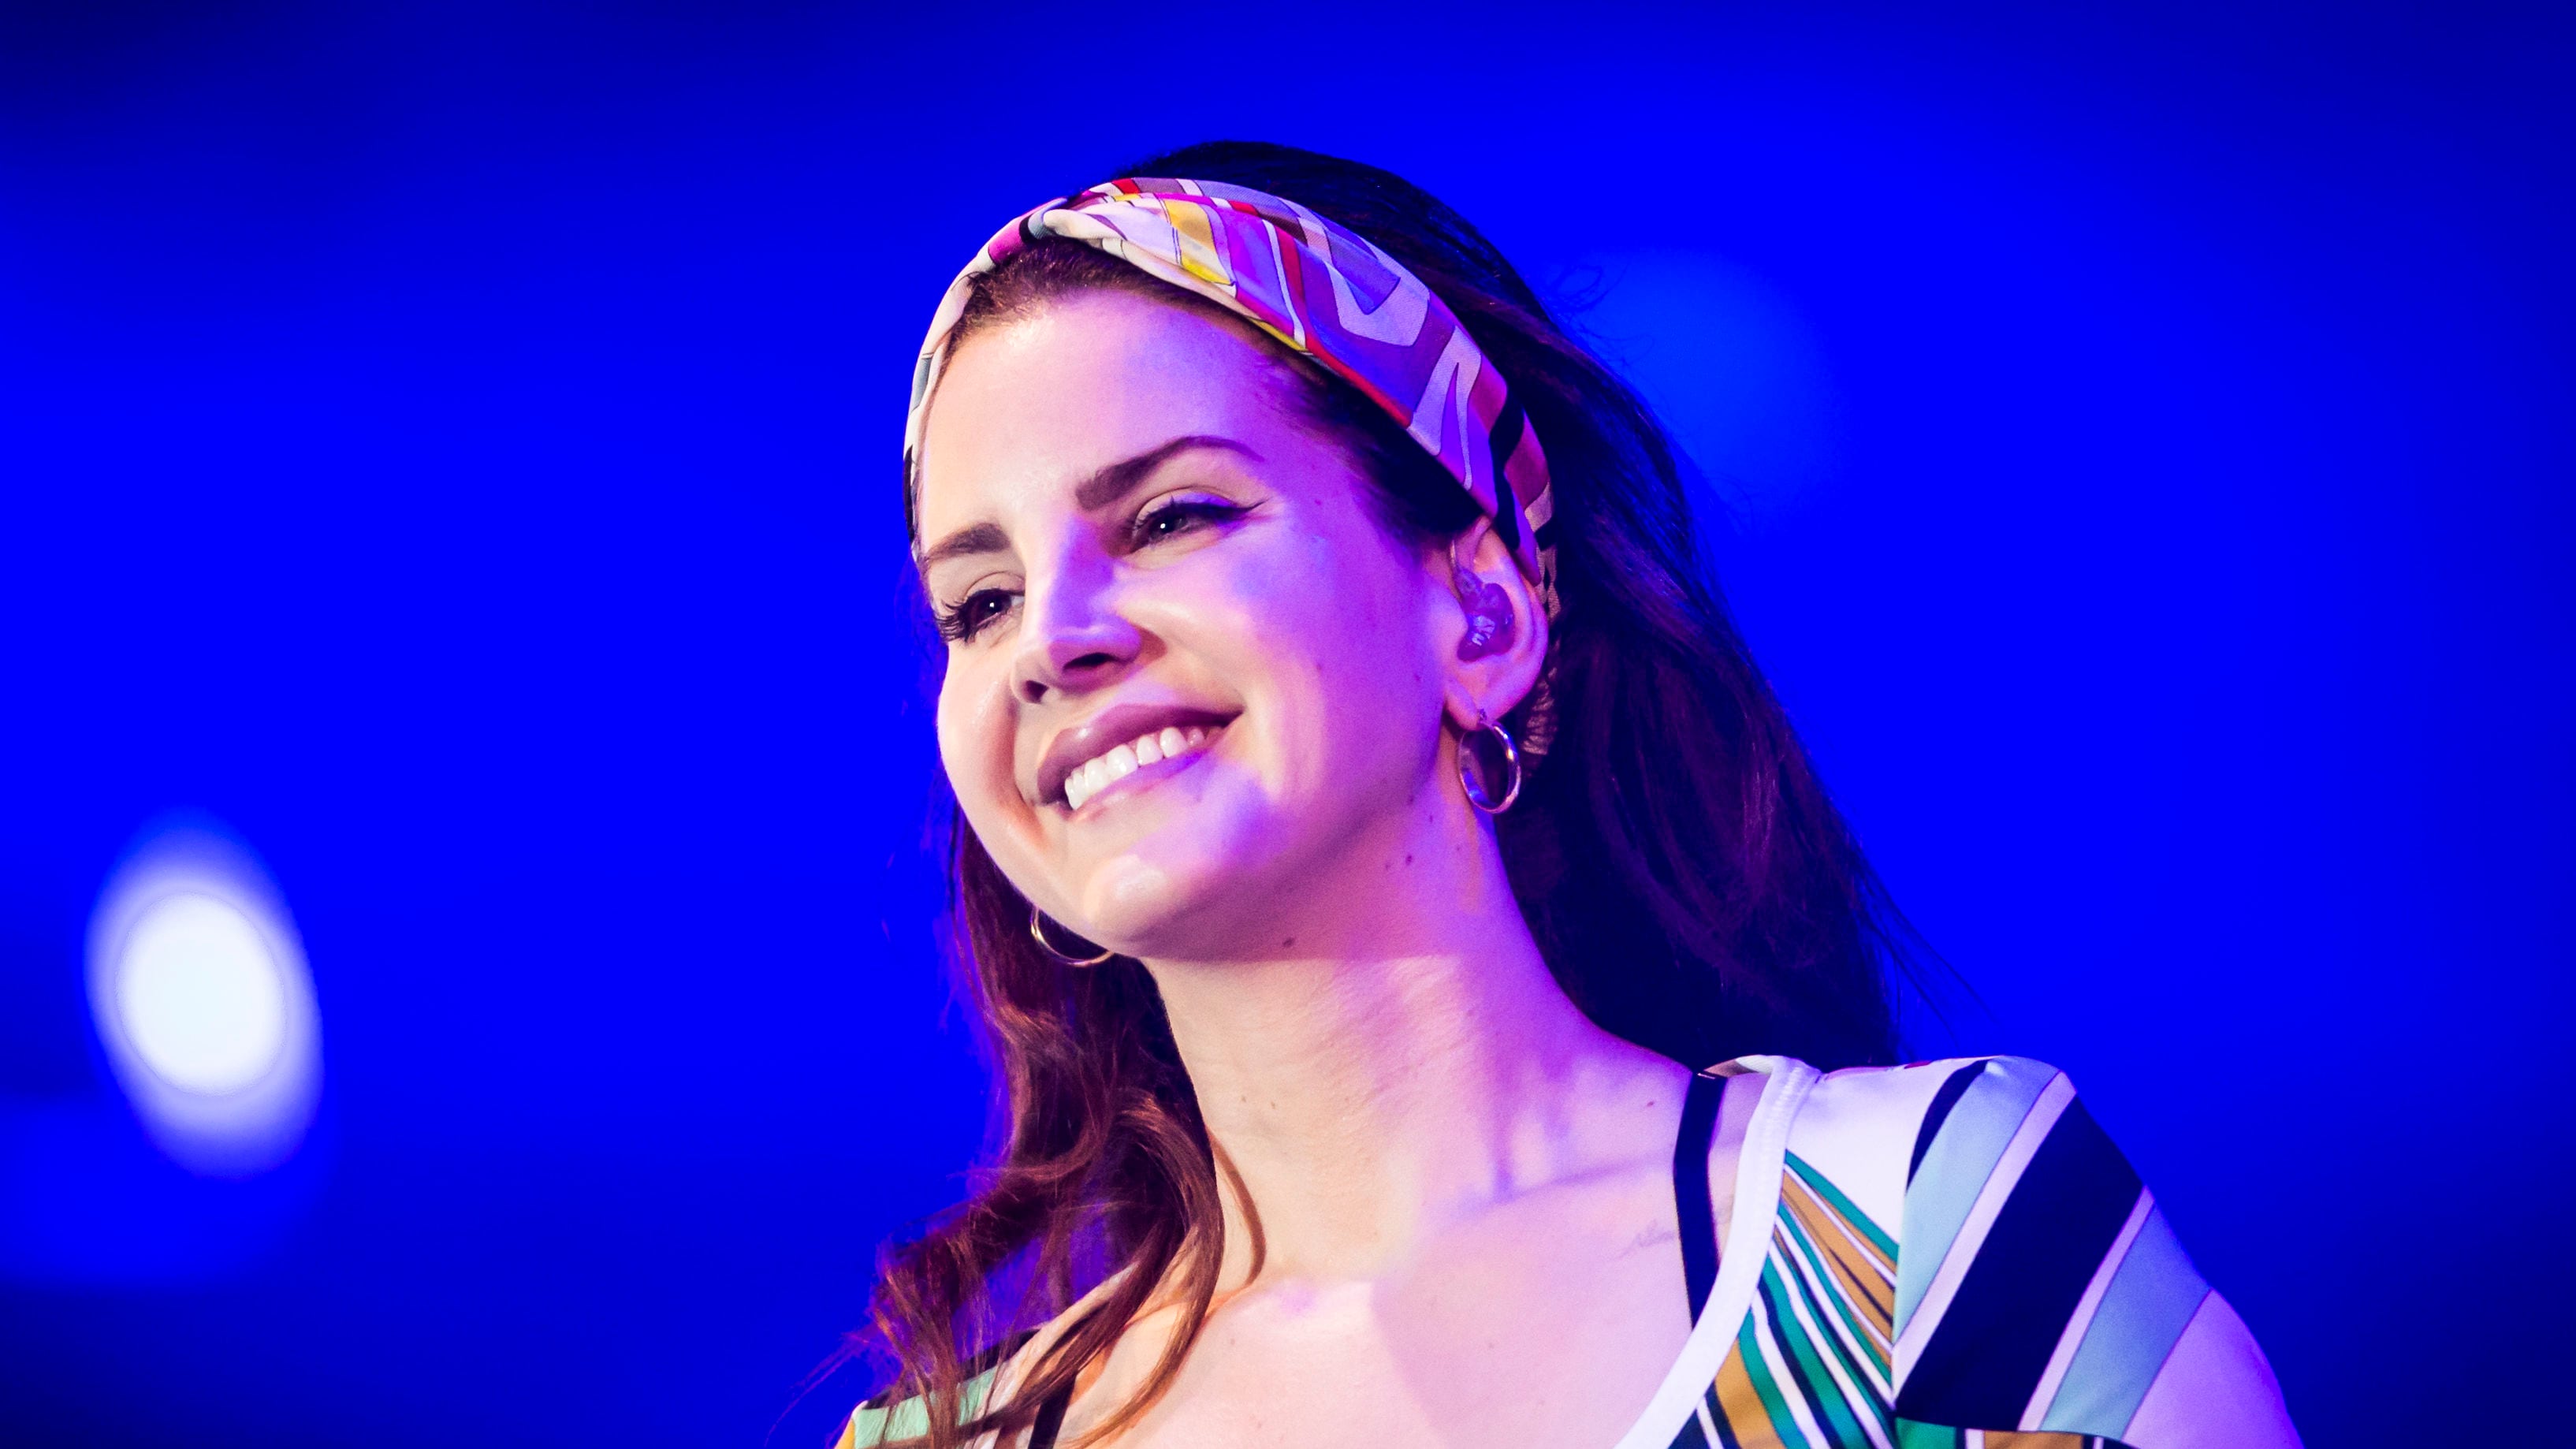 Singer Lana Del Rey accepted a special recognition award at the Ivor Novellos